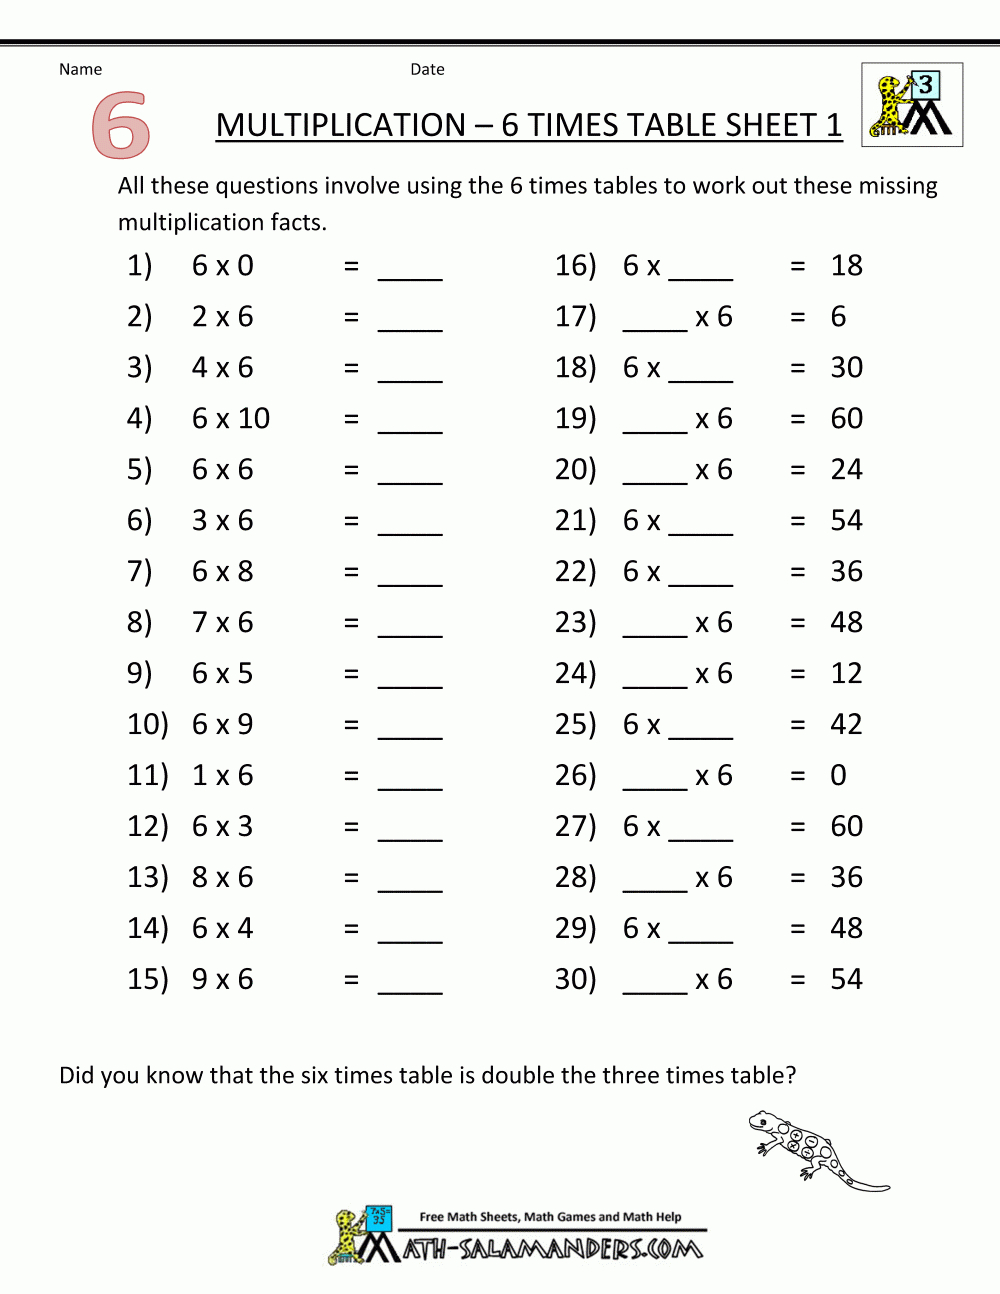 Multiplication Drill Sheets 3Rd Grade - Grade 9 Math Worksheets Printable Free With Answers